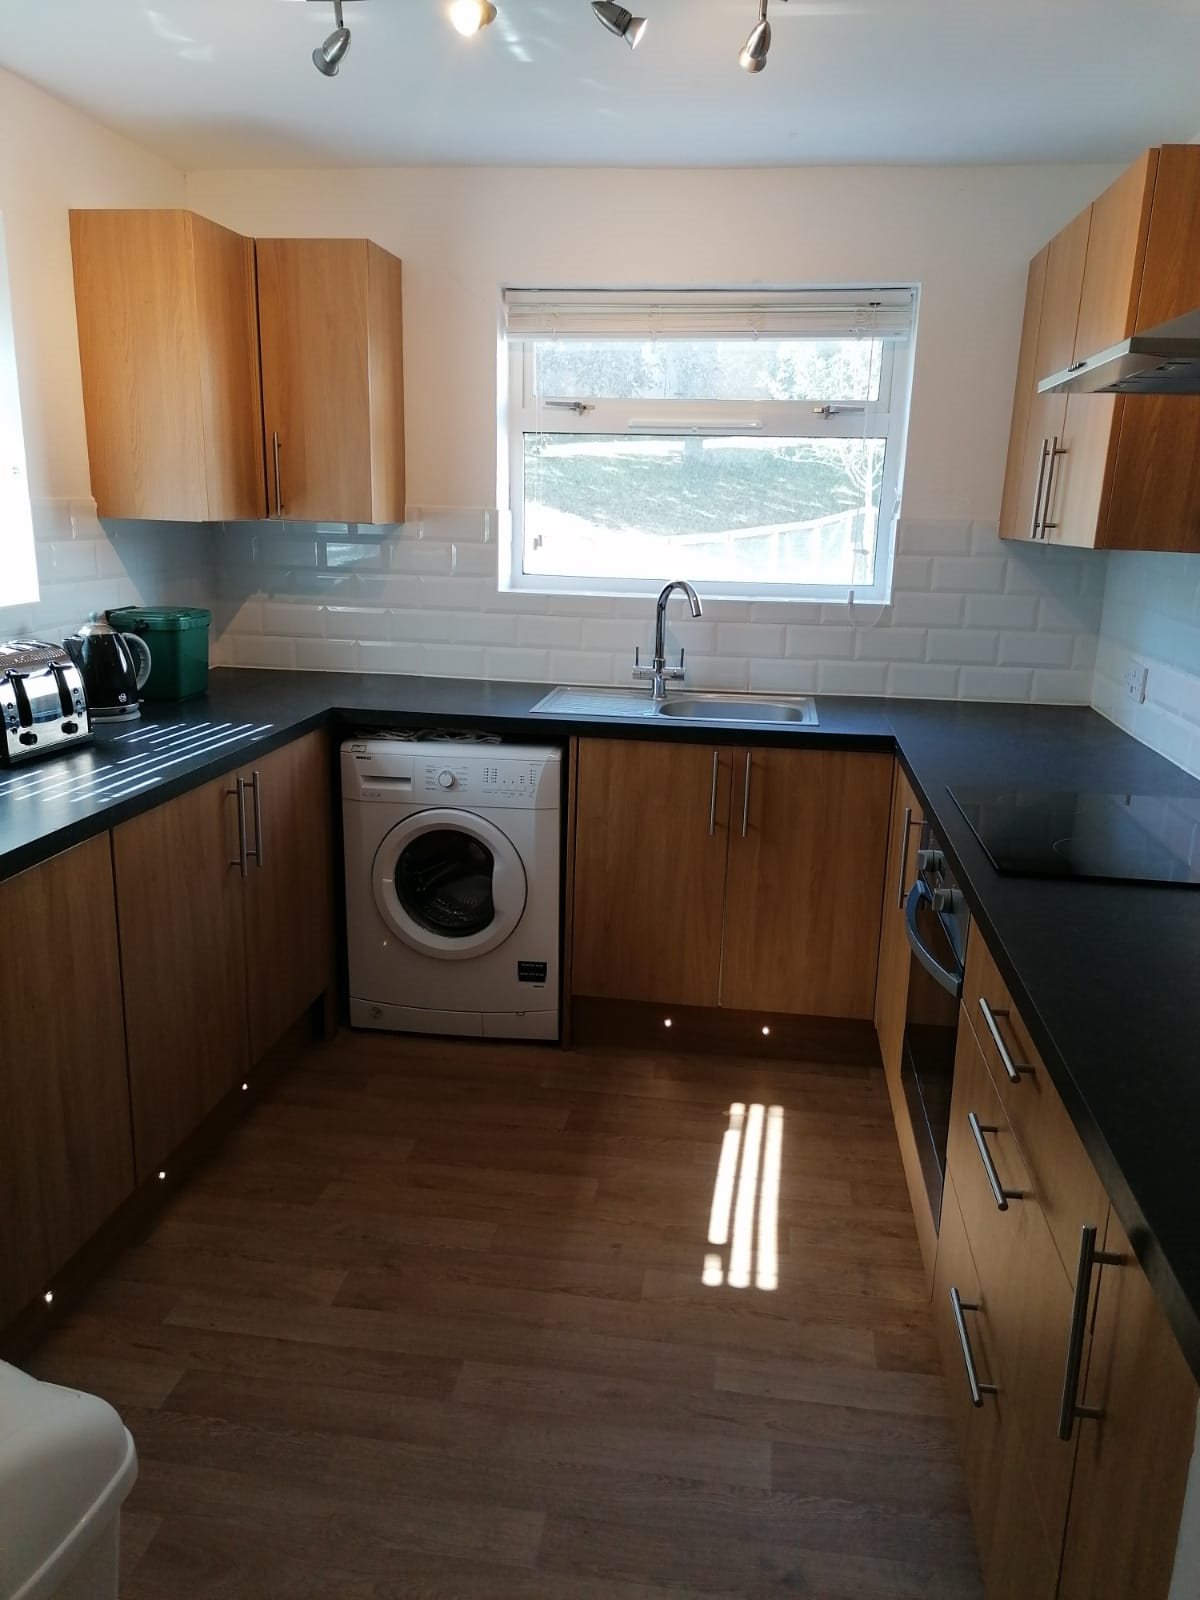 3 bed flat to rent in Titania Close, Colchester, CO4 